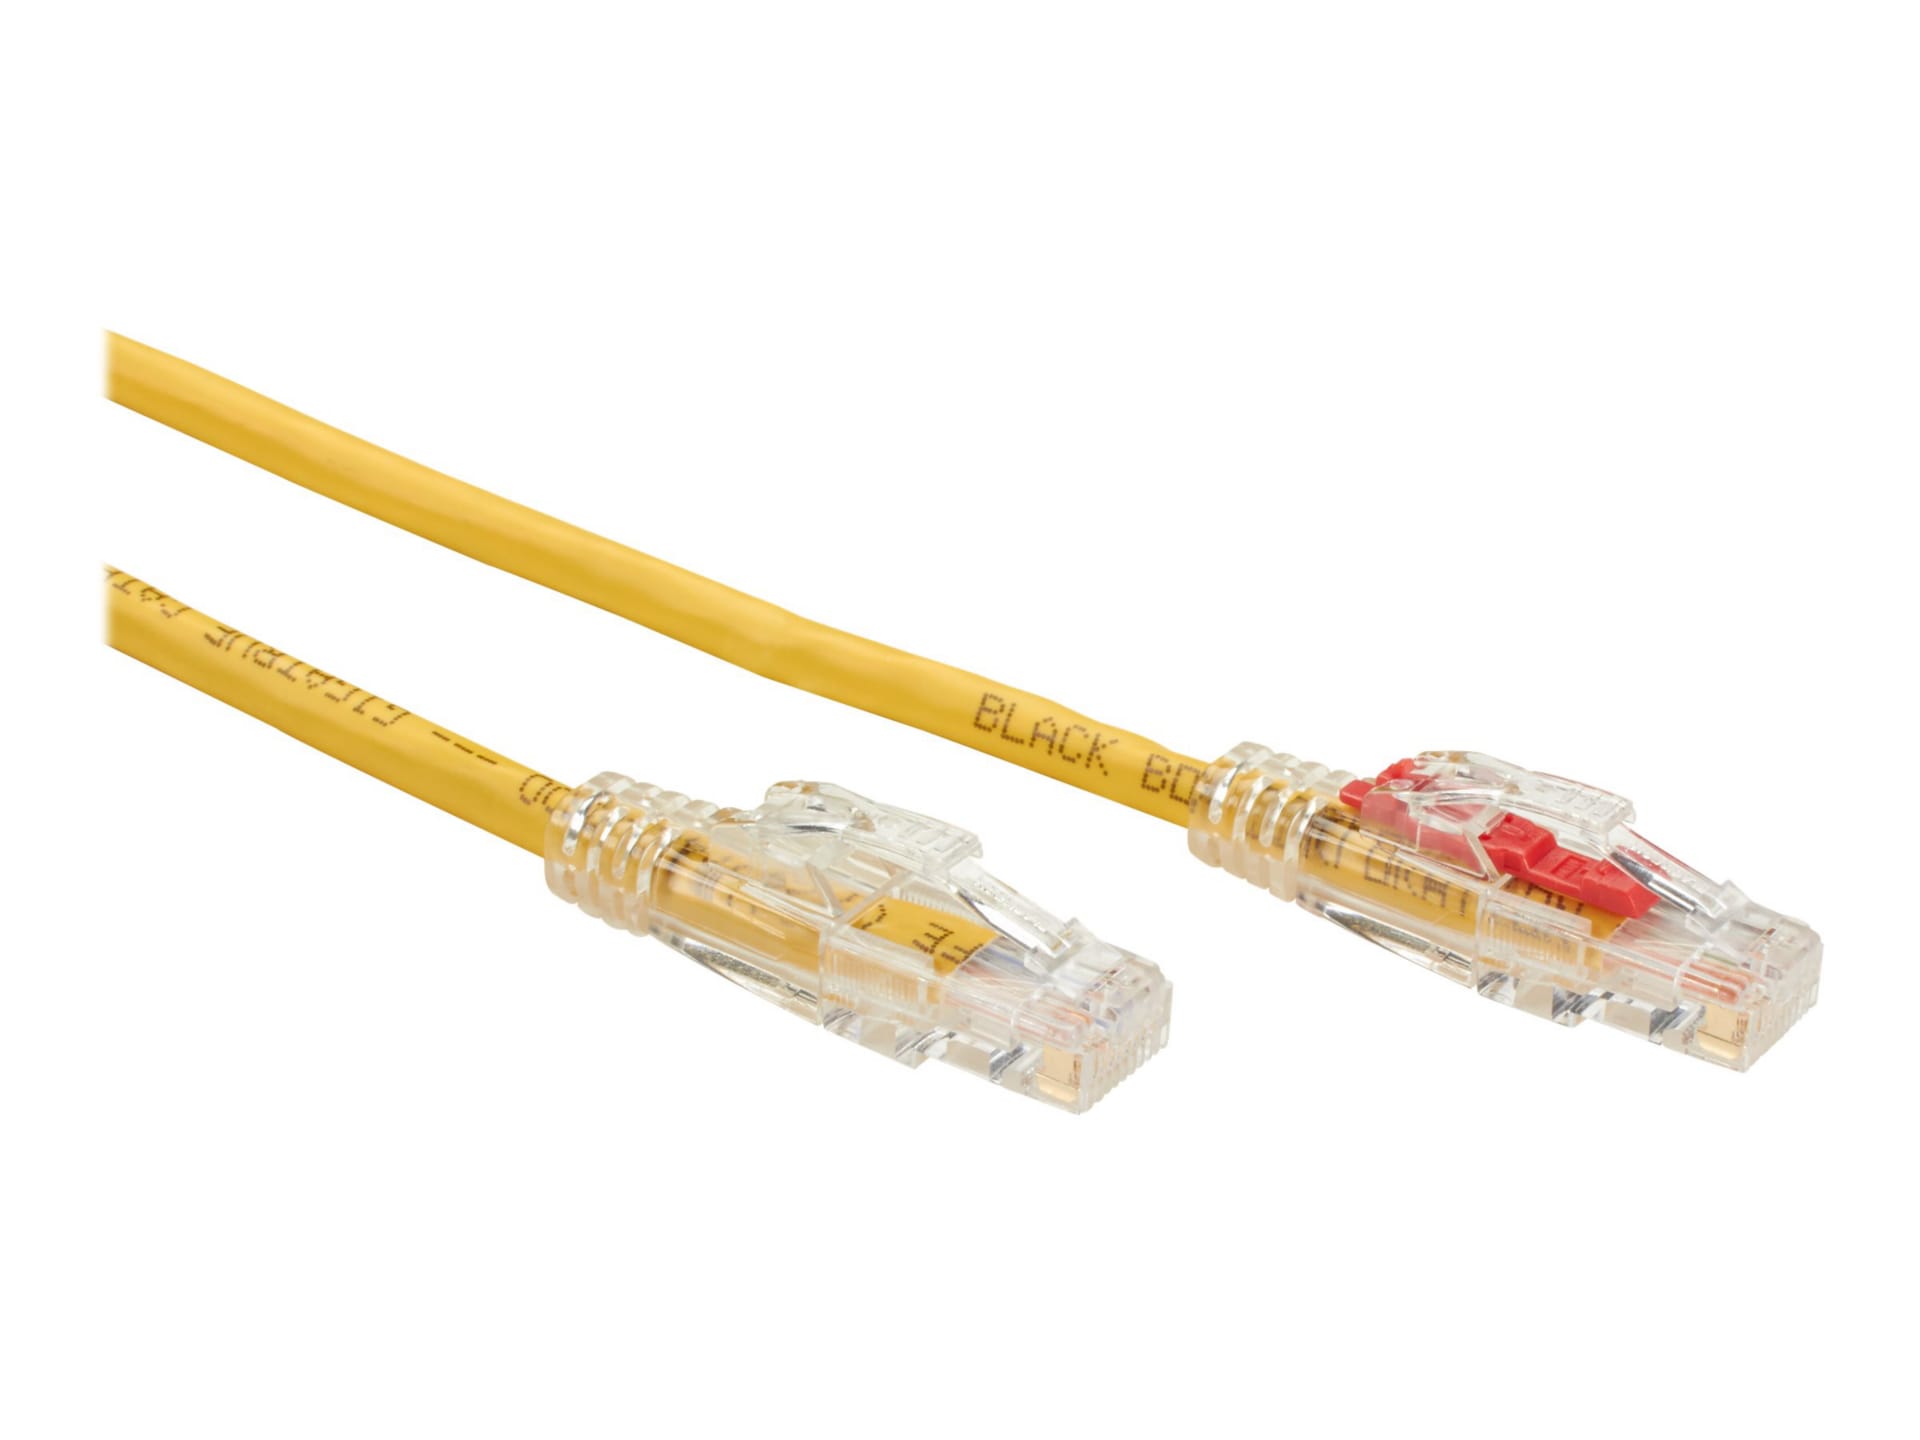 Black Box GigaBase 3 patch cable - 3 m - yellow